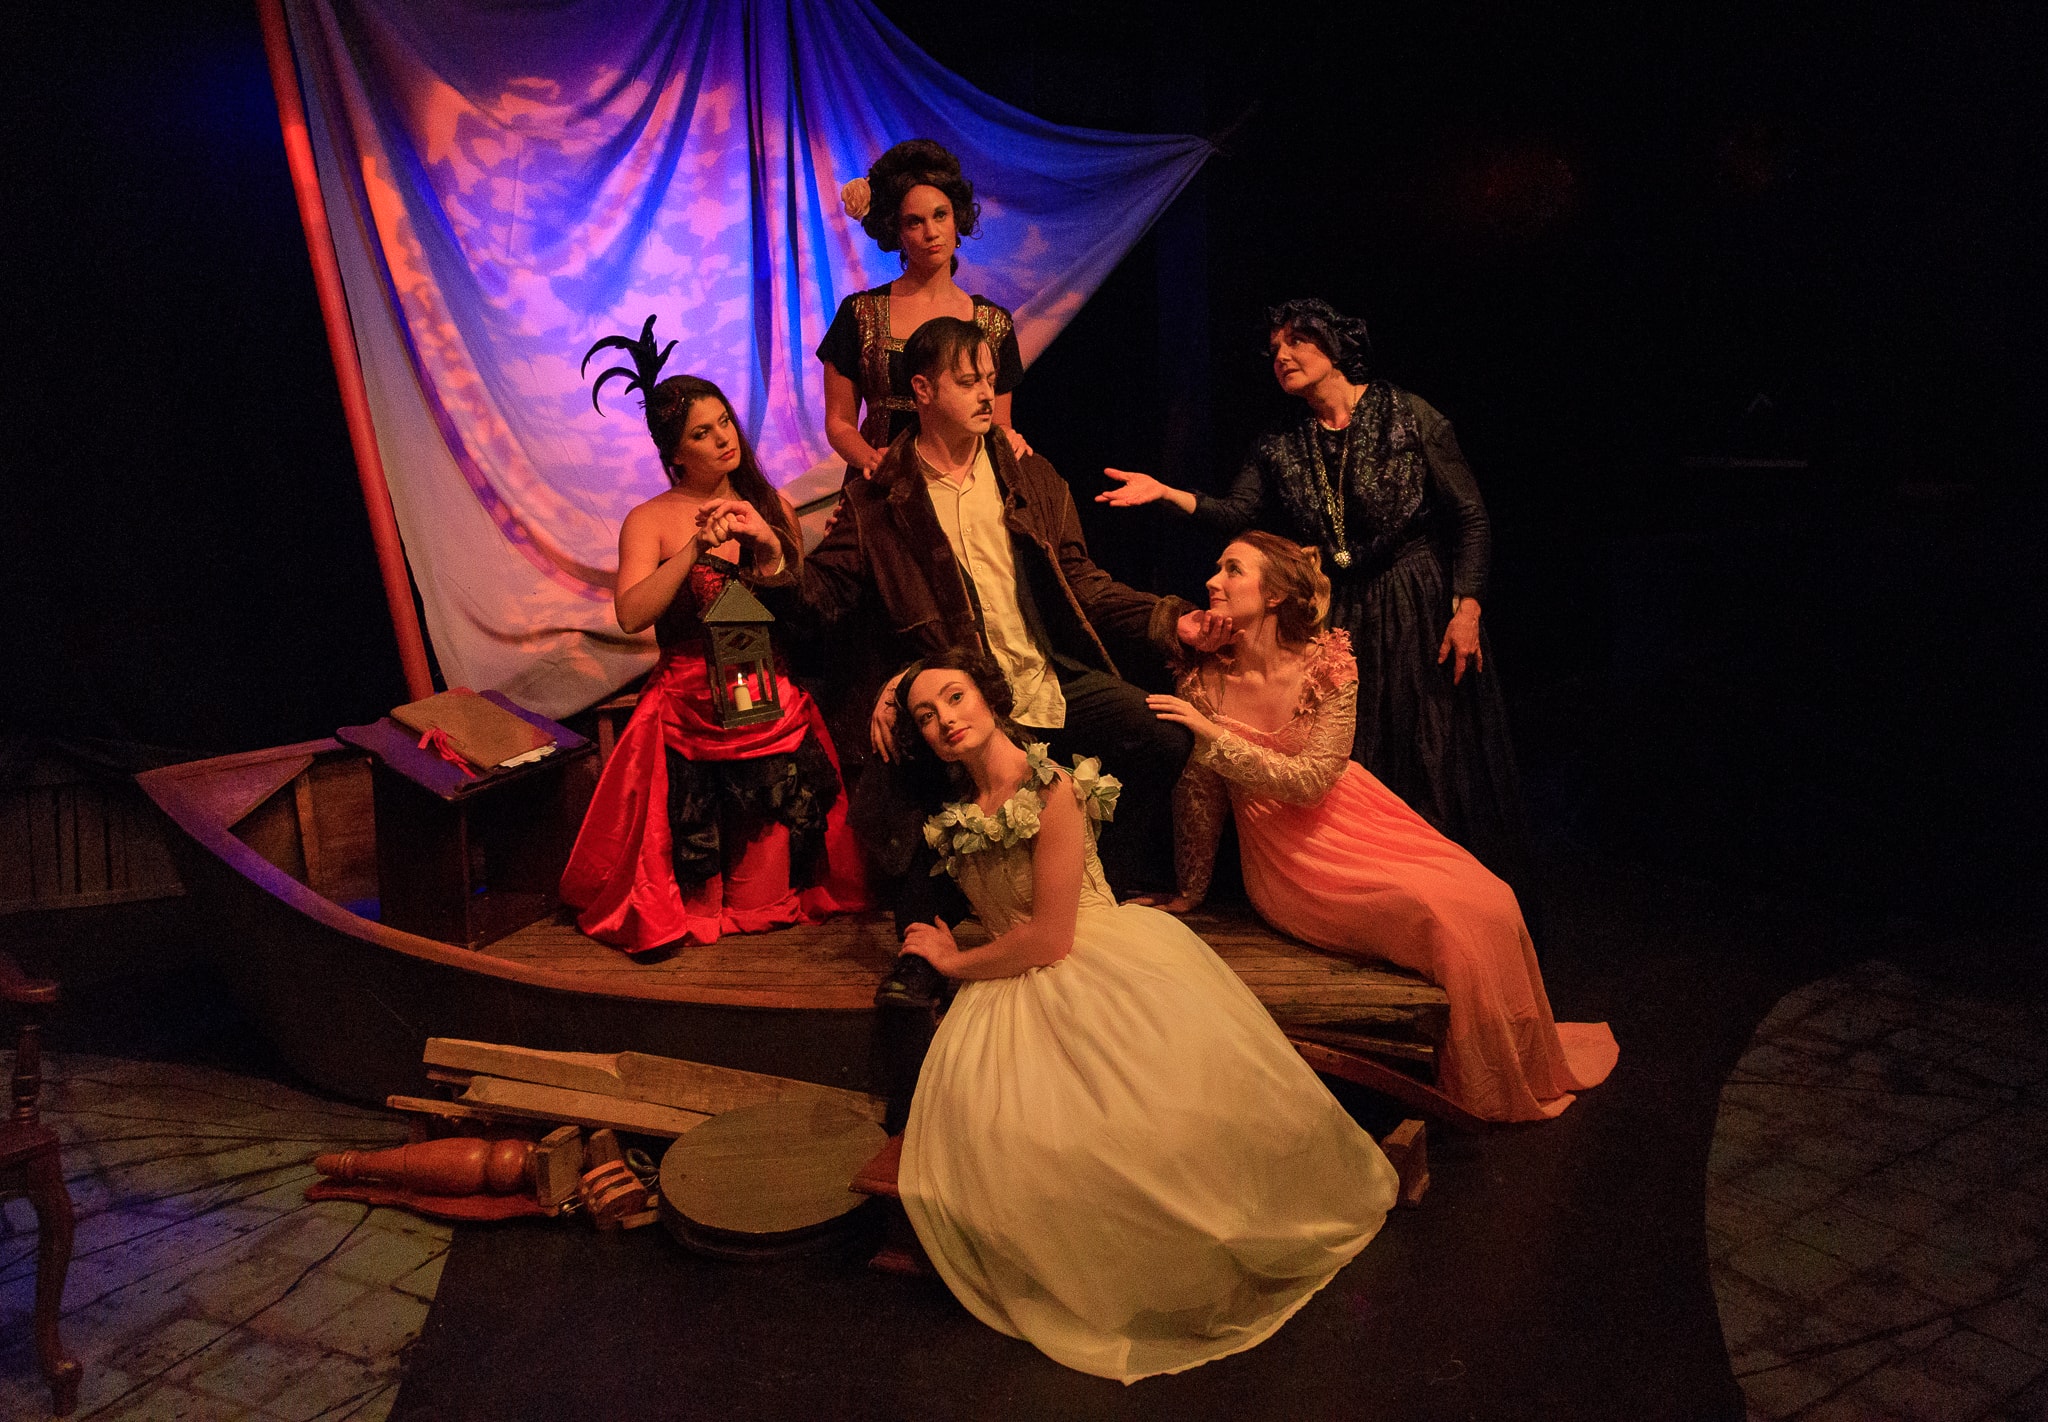 Clockwise from Center: Katherine Riddle as Mother, Jennifer Pagnard as Muddy, Erin Granfield as Elmira, Sara Hurley as Virginia, Stephen Gregory Smith as Edgar Allan Poe, and Mary Kate Brouillet as the Whore in Nevermore. Photo Credit: Keith Waters/Kx Photography